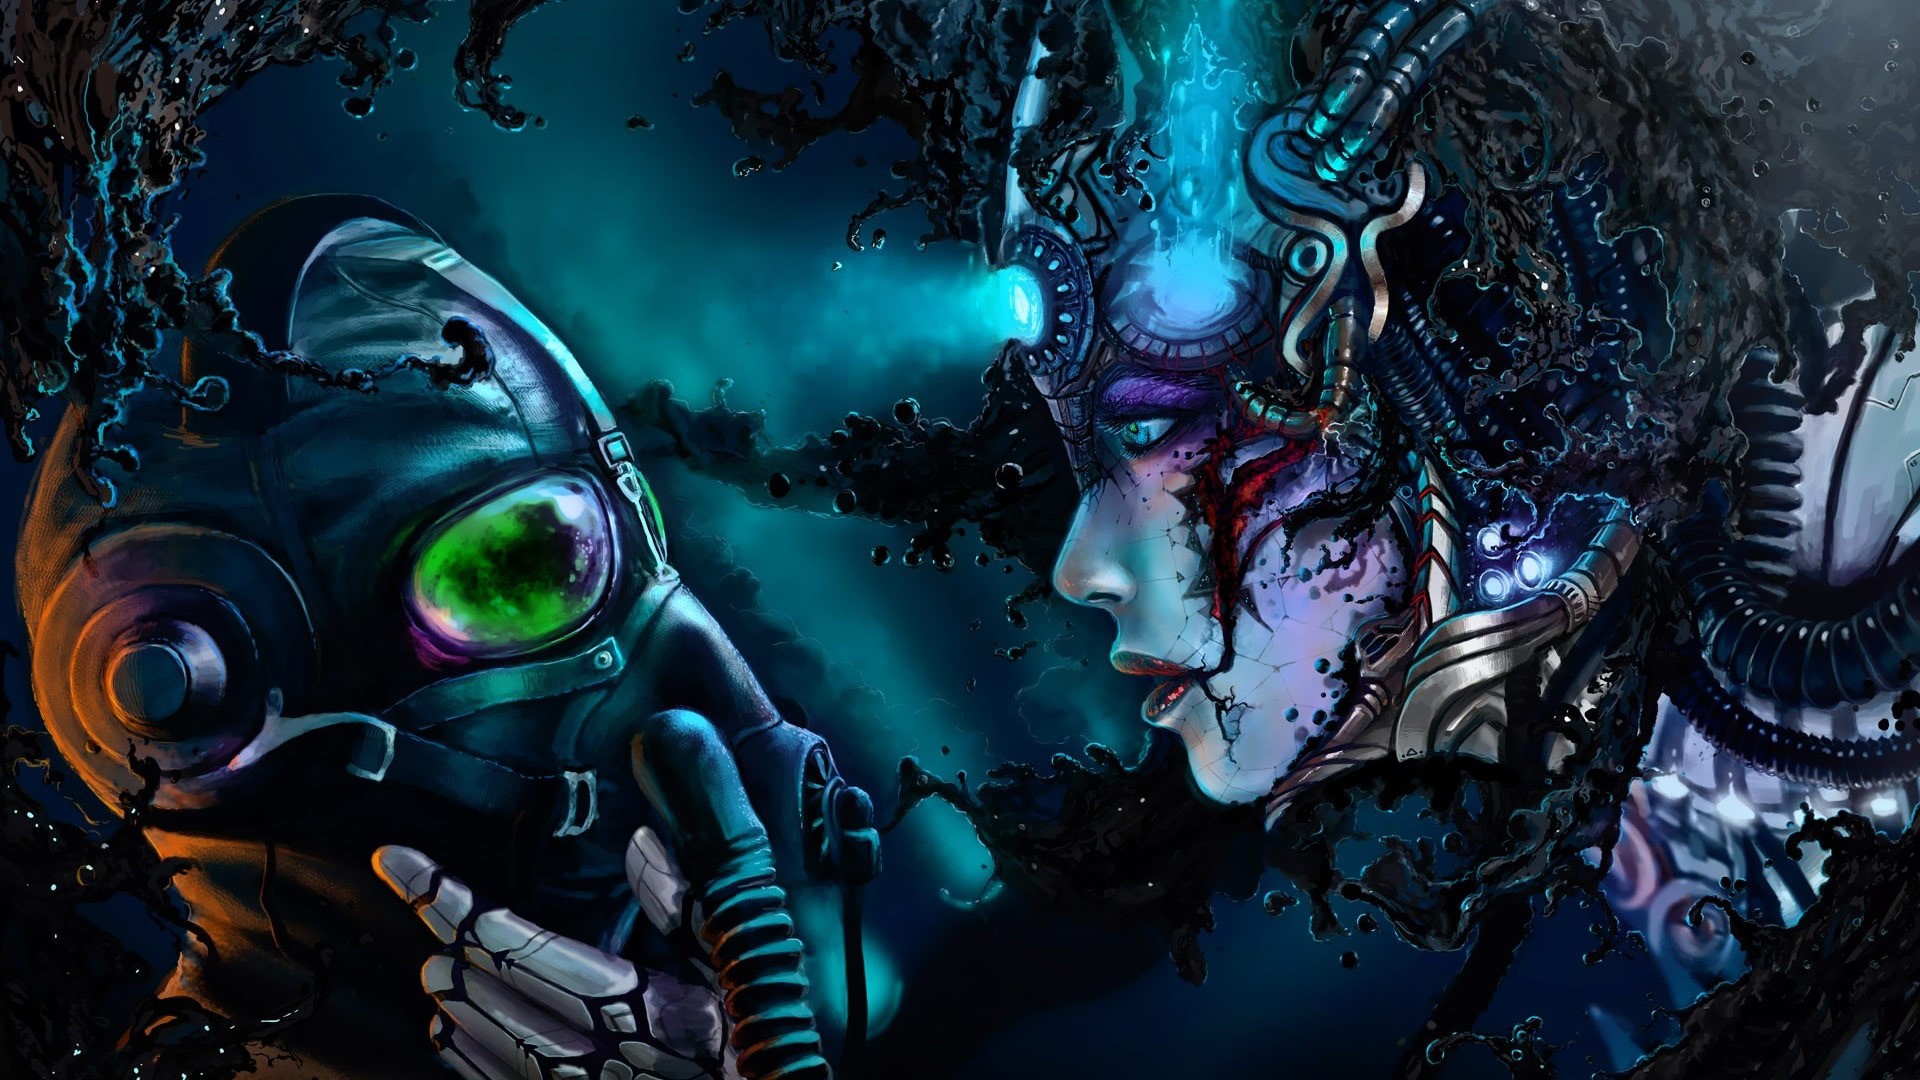 space punks download